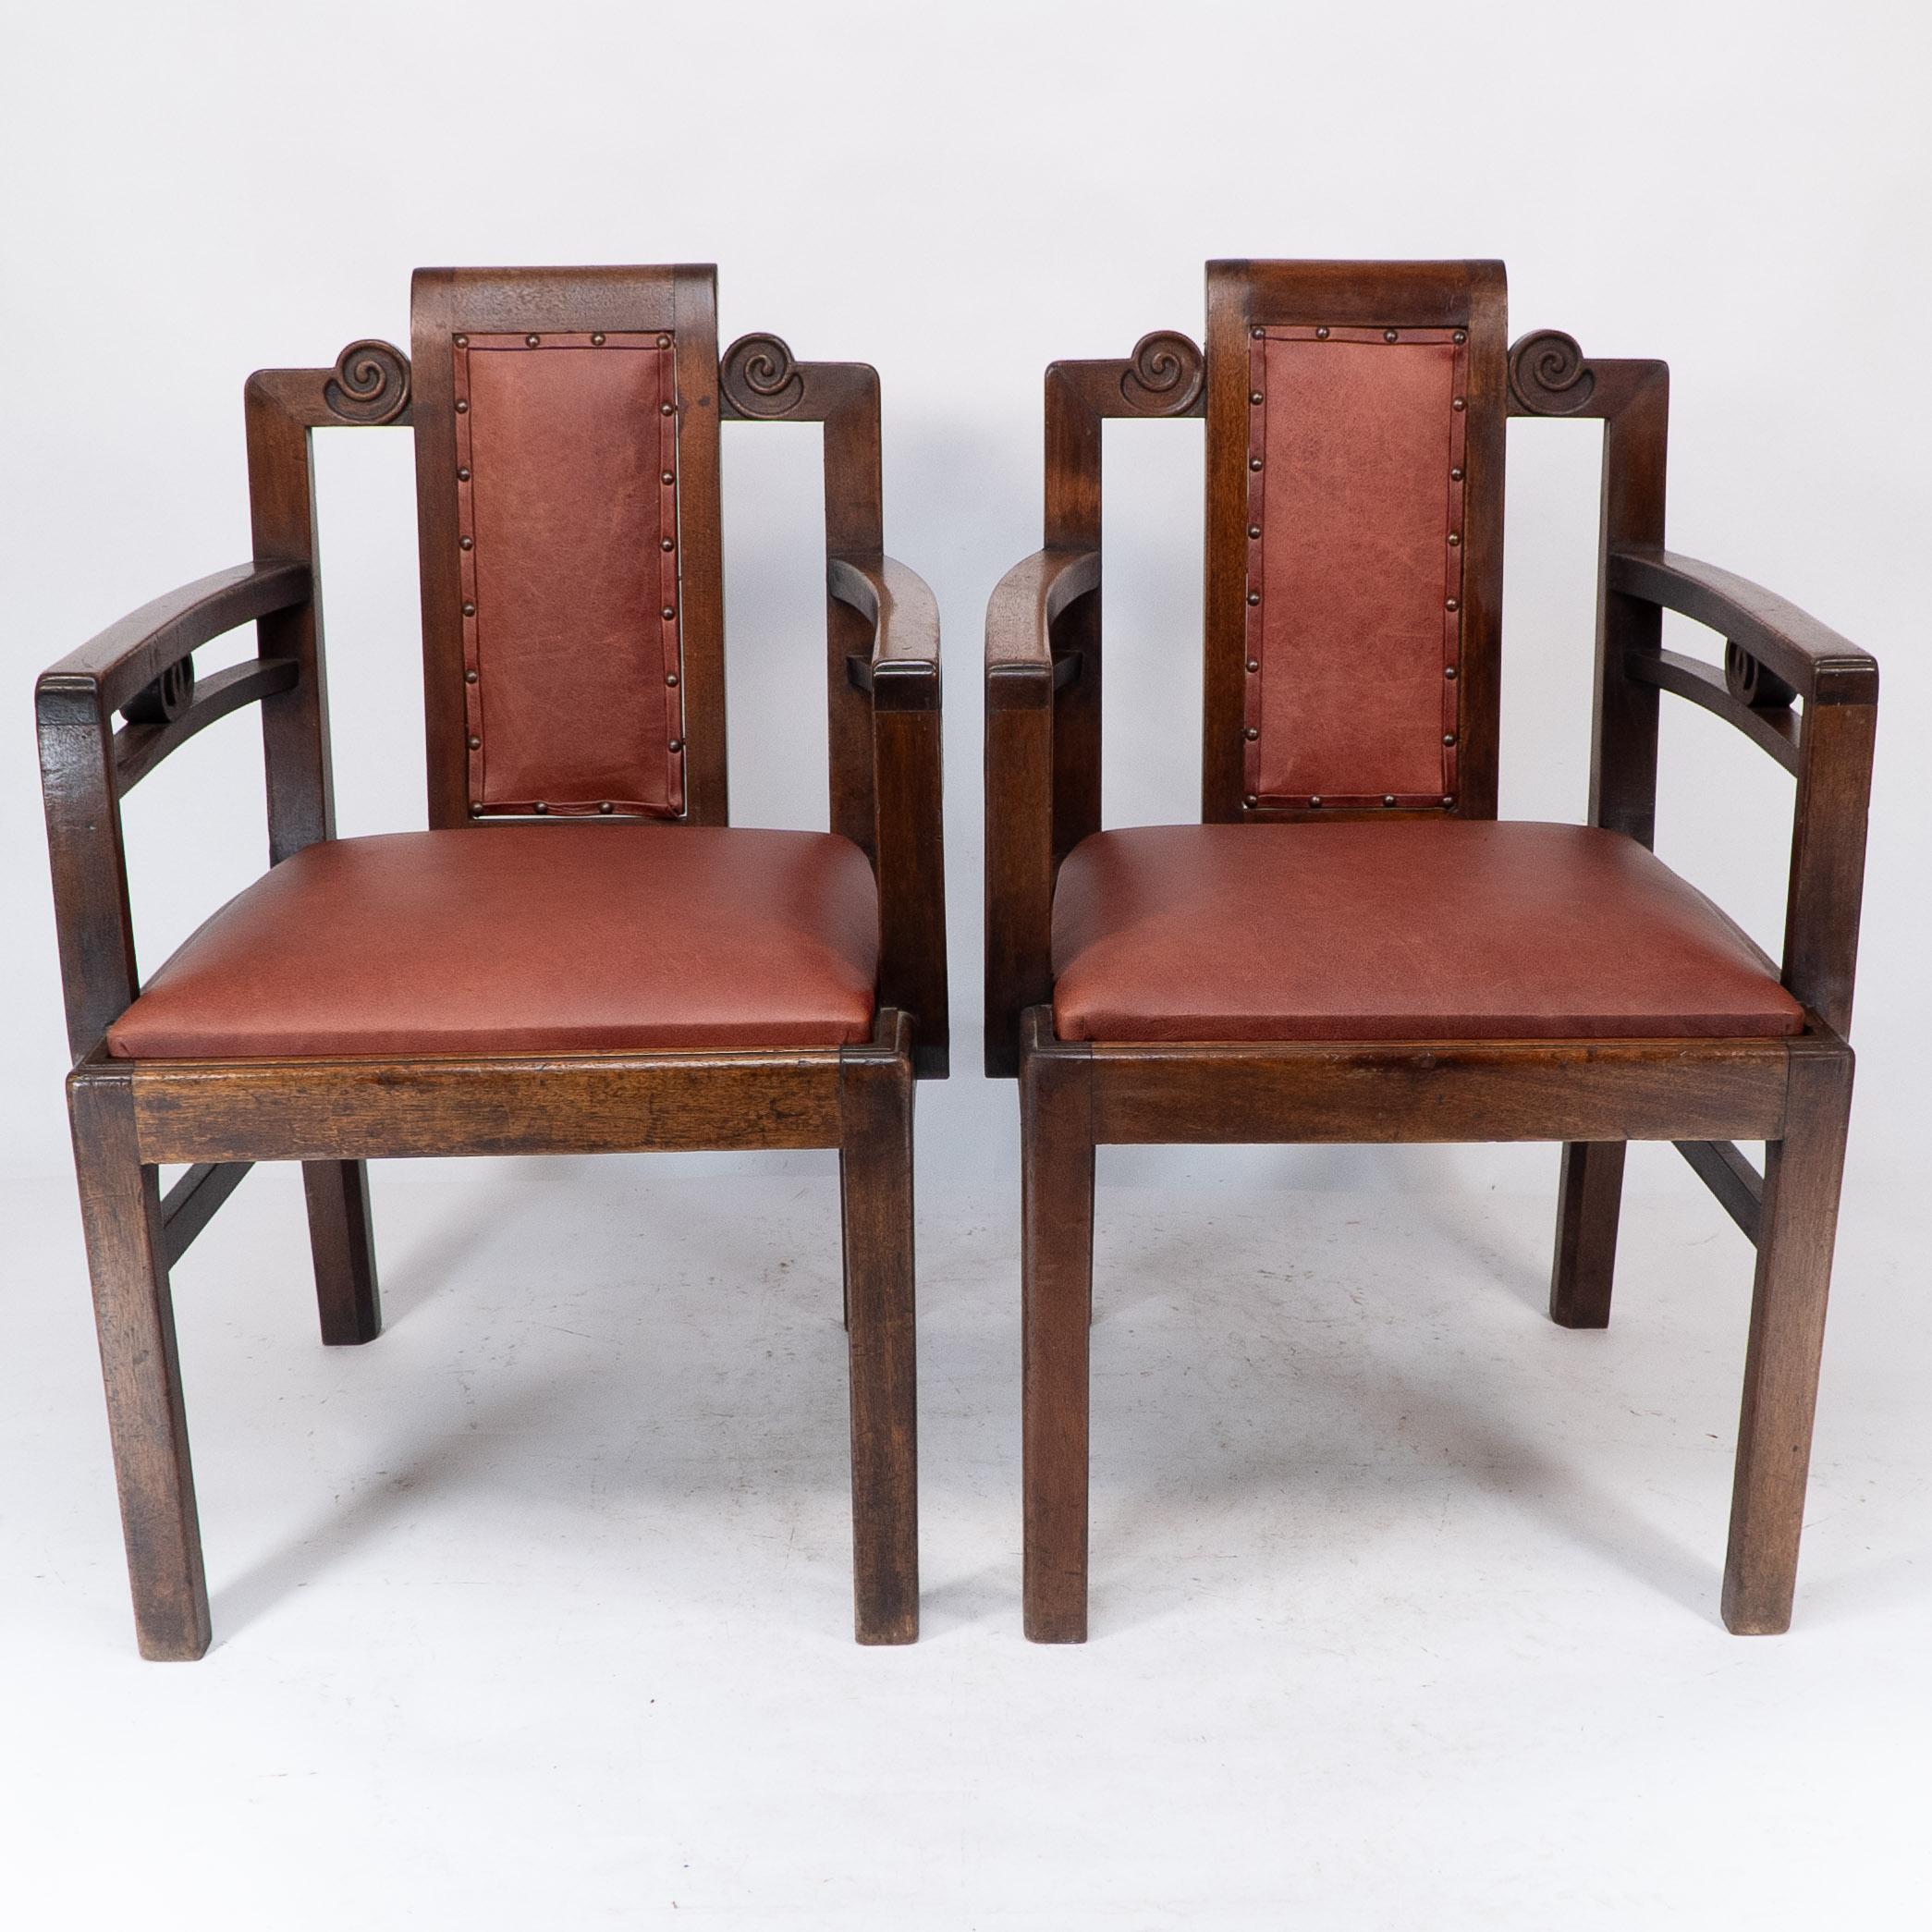 Sir Frank Brangwyn (attributed,) a pair of mahogany armchairs, in the Chinese style with professionally re-upholstered leather padded back and drop-in seat. 
These chairs share stylistic qualities with the famous armchairs he designed for the Salle